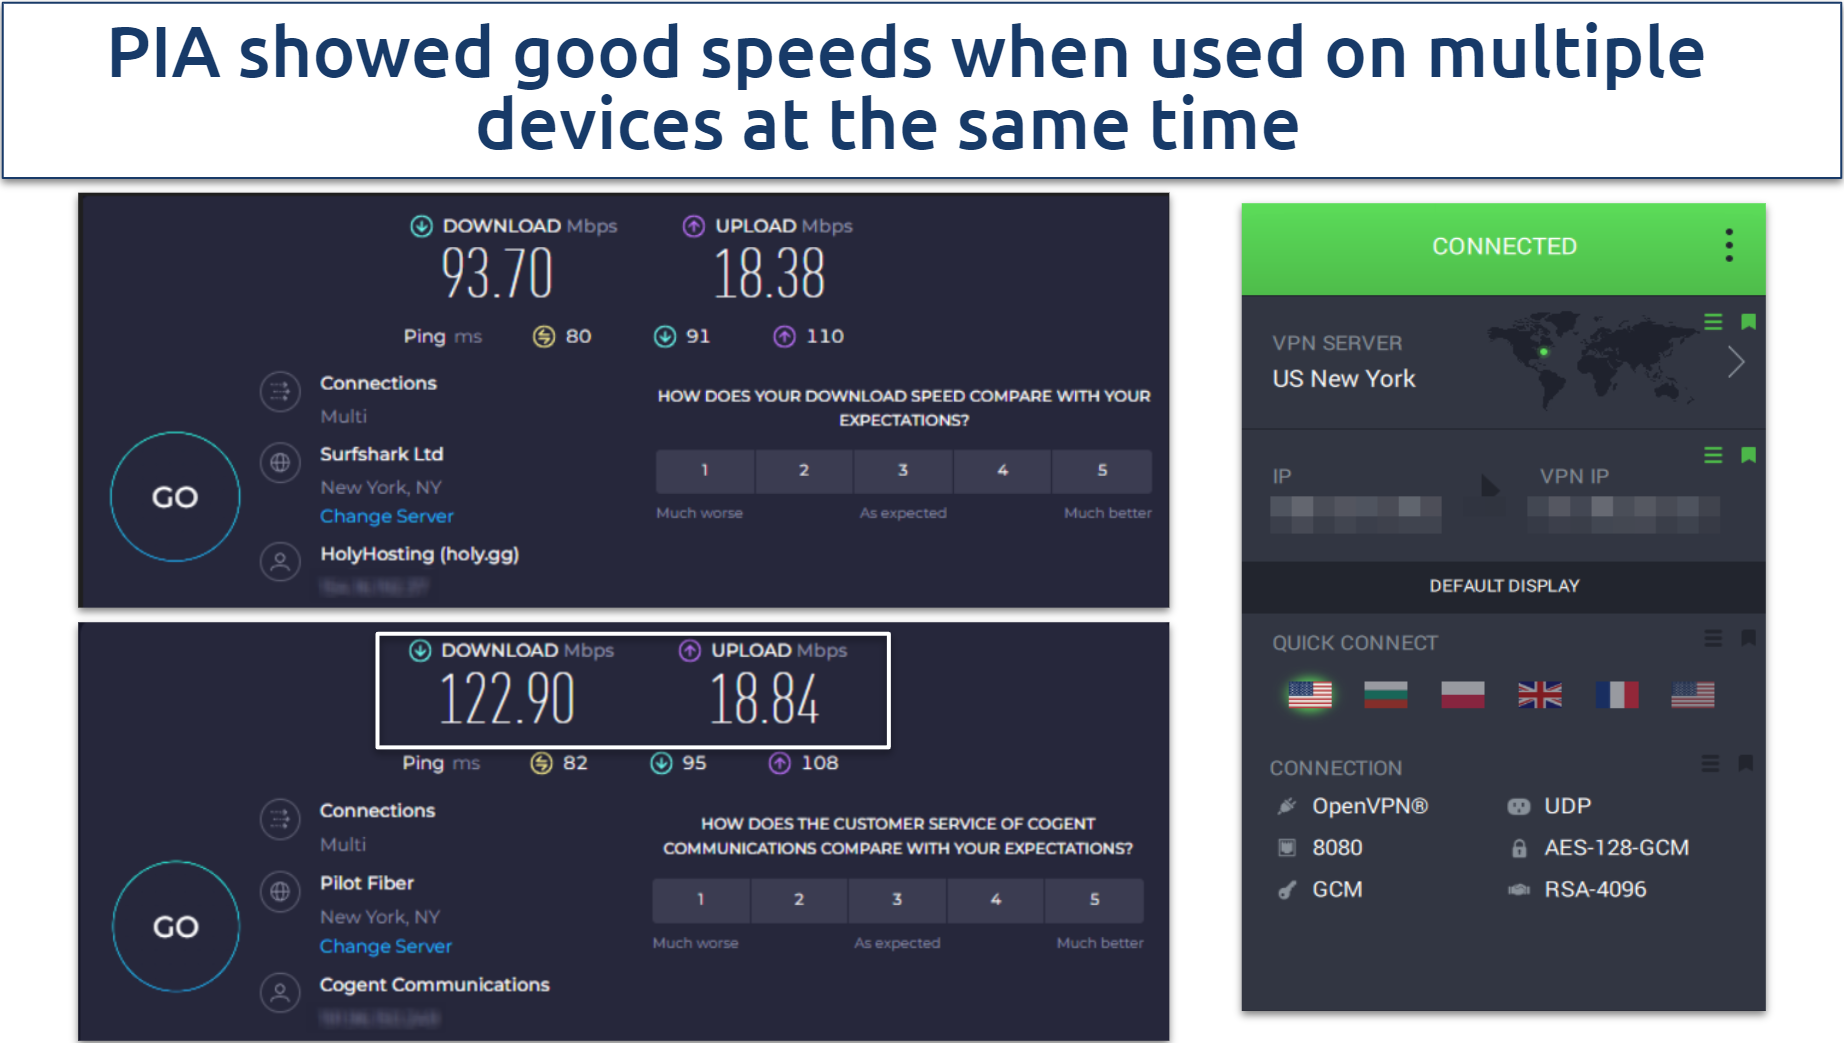 Screenshot showing speed results of PIA's NY server